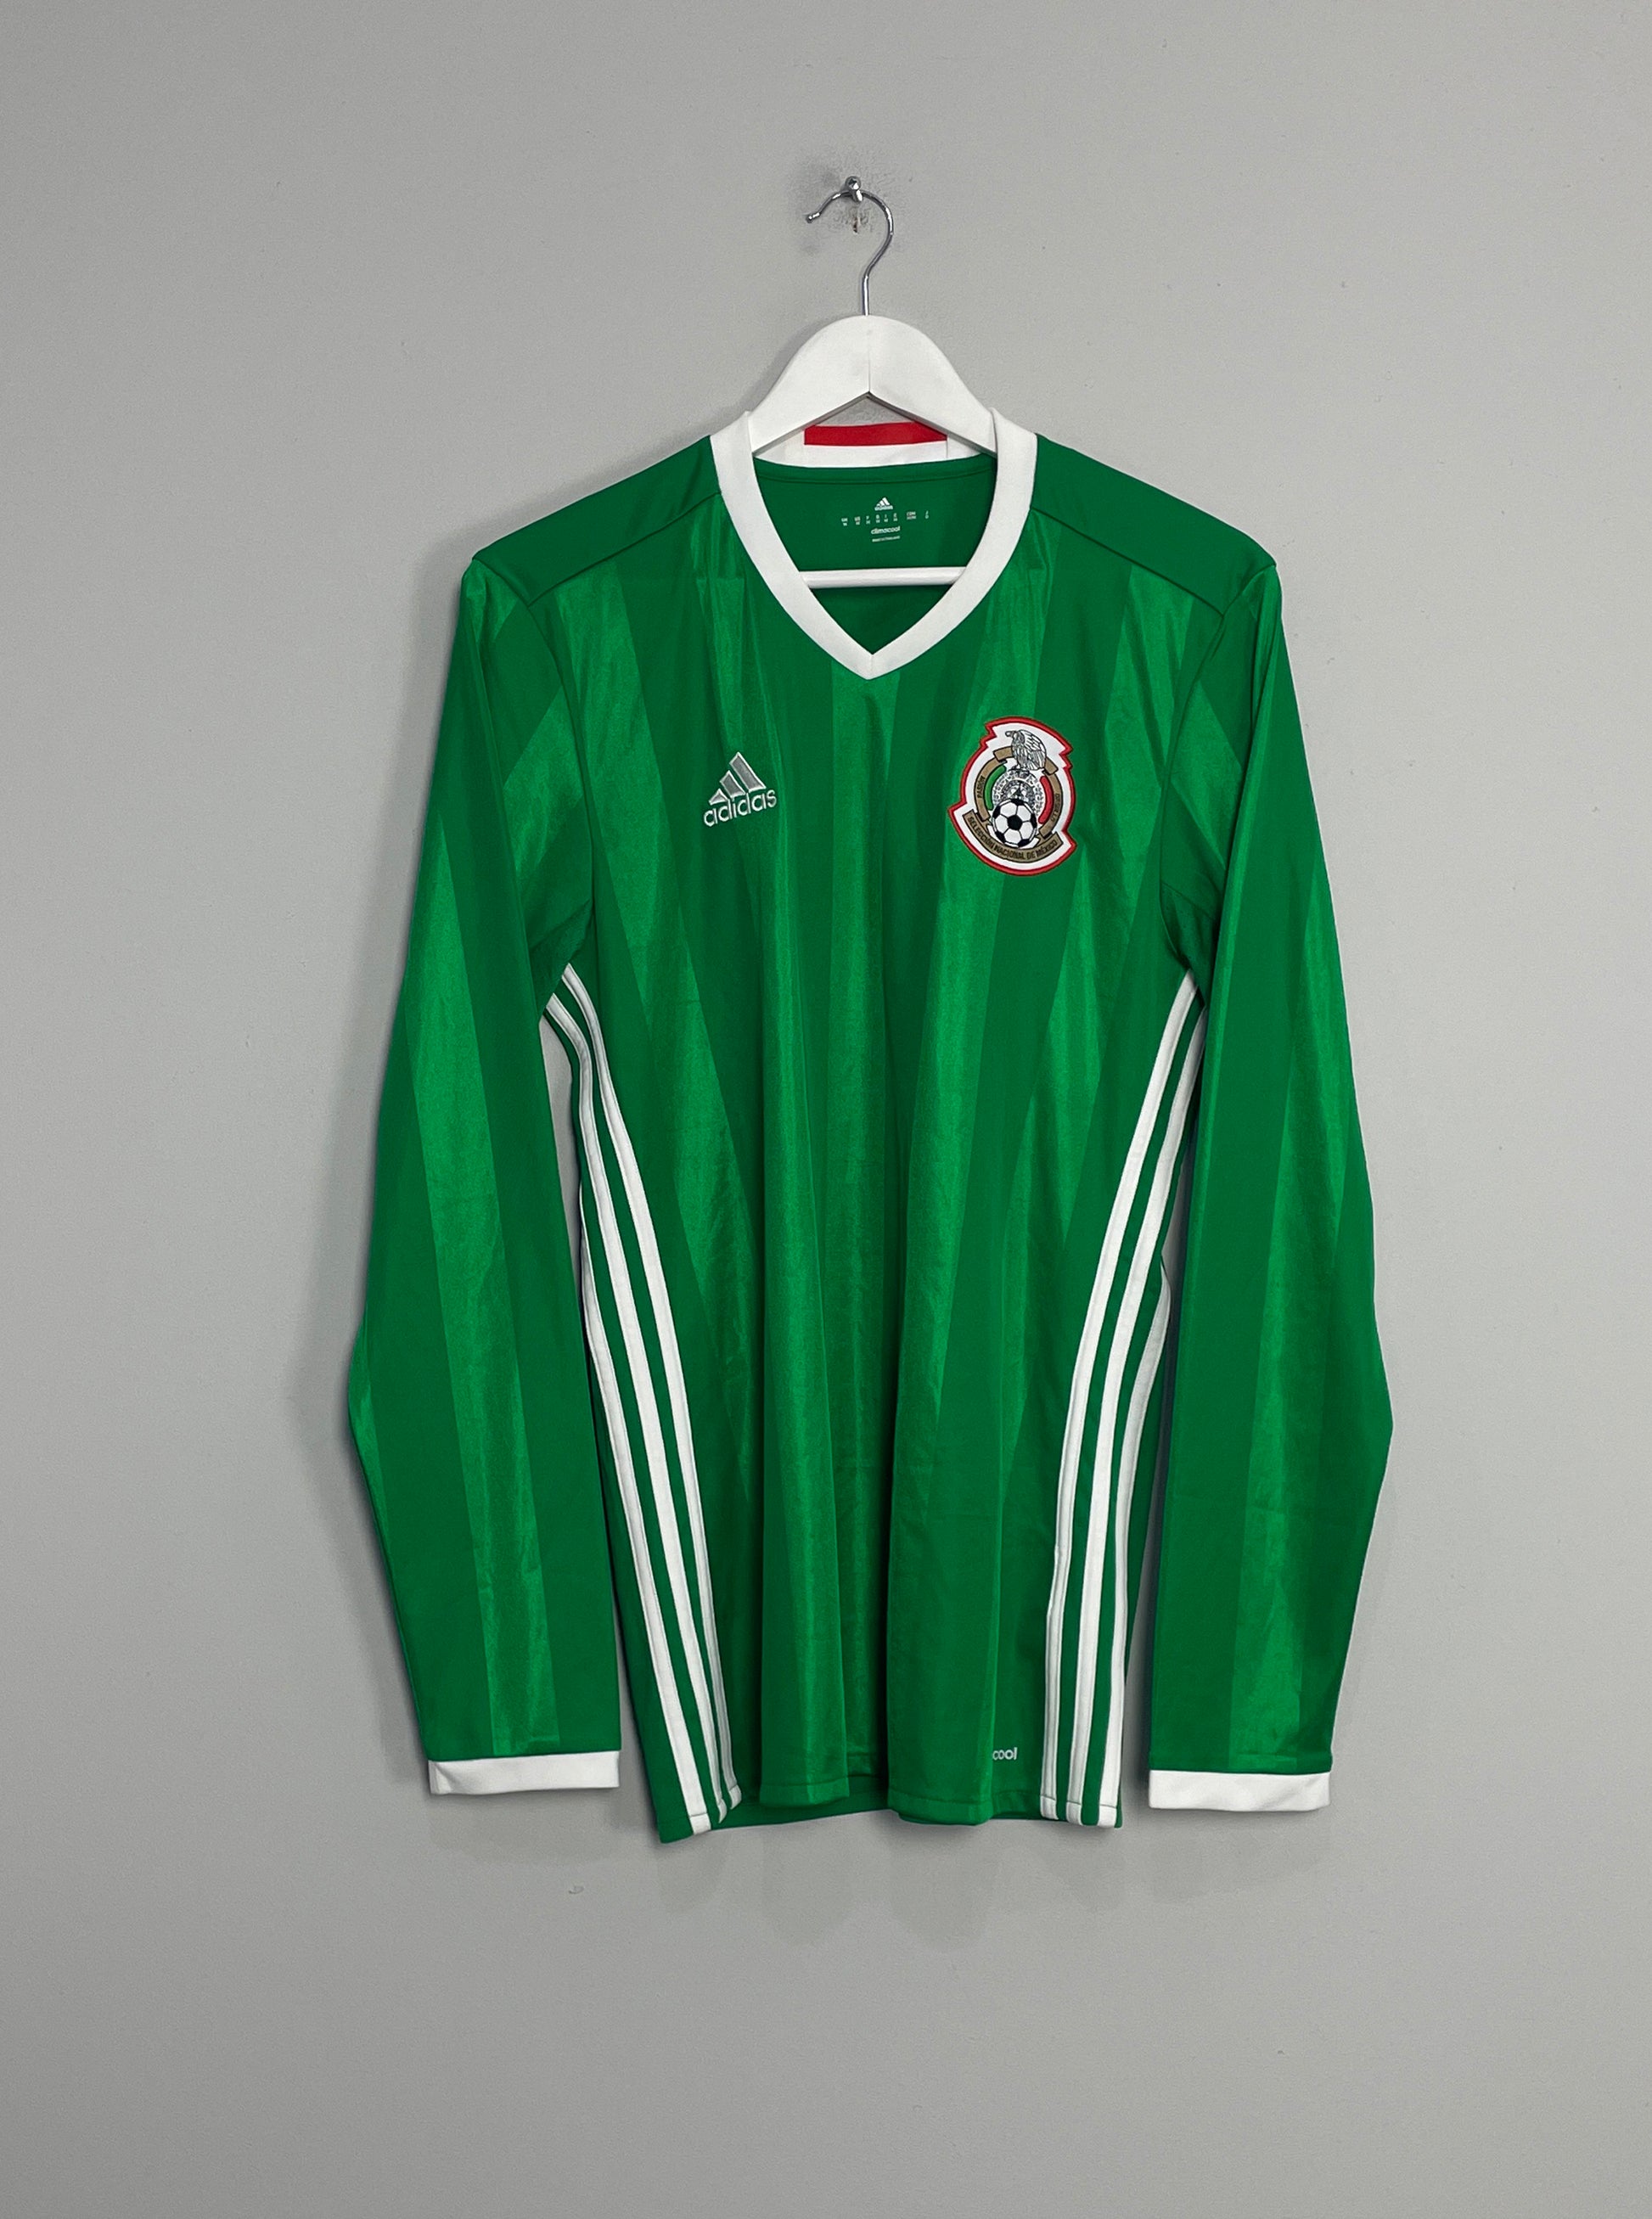 Image of the Mexico shirt from the 2016/17 season